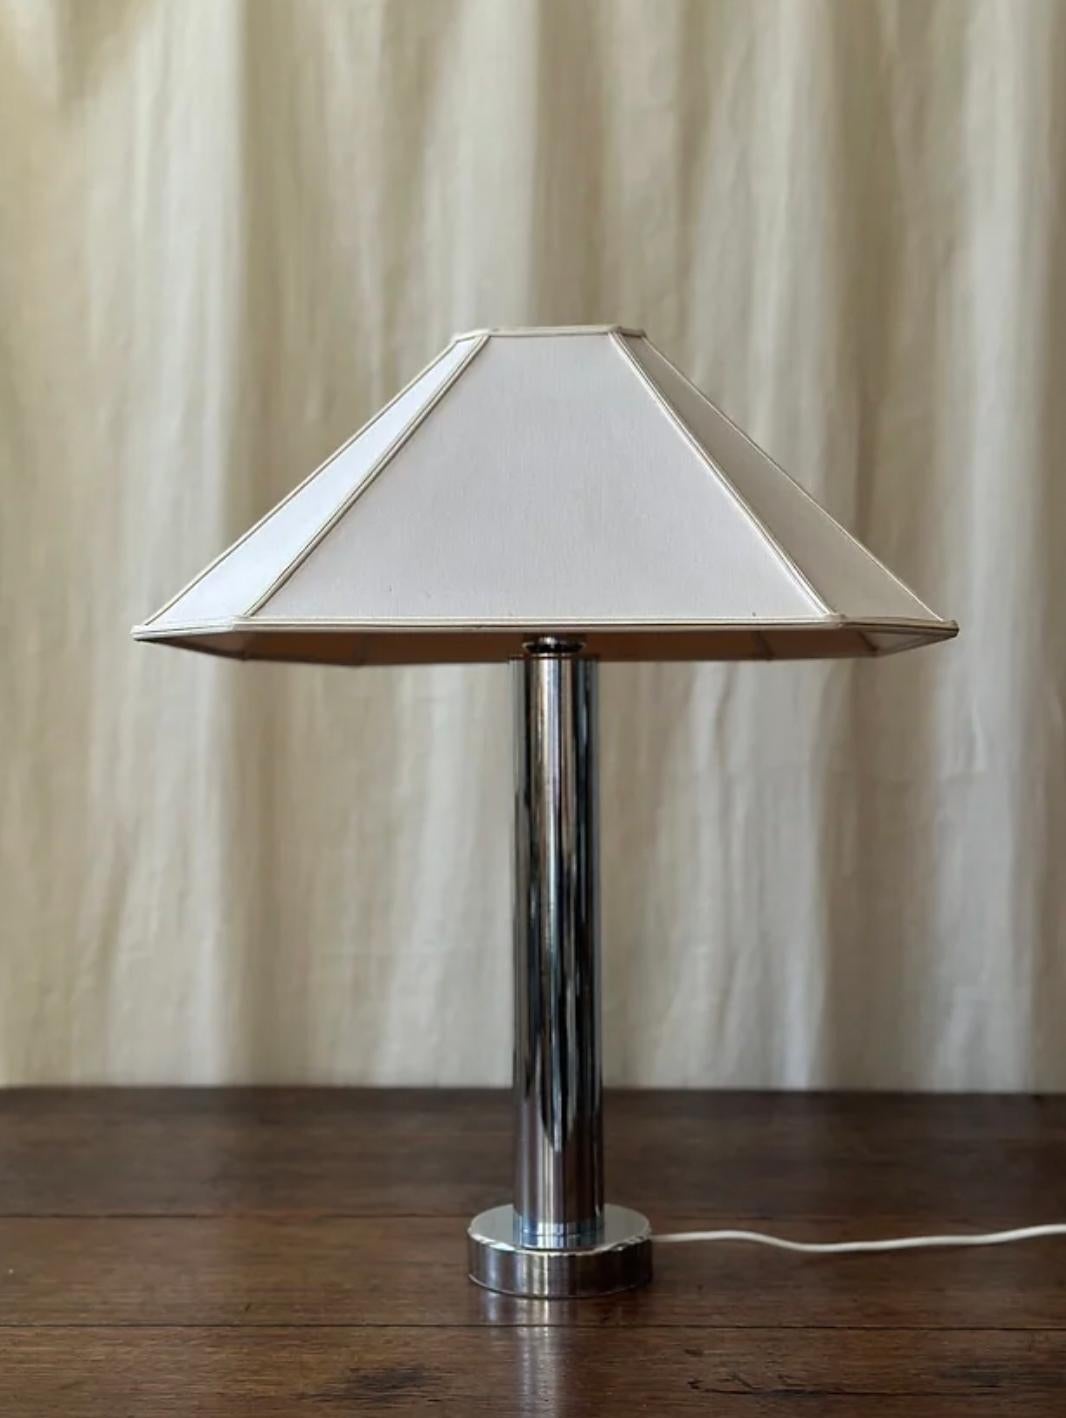 1970s Chrome Lamp & Shade, Lamp by Kosta Elarmatur, Sweden.

Lamp Rewired for GB & PAT Tested 

Lamp Measures (Not Including Shade) - 46 cm (Height) x 12cm (Depth)

Shade Measures -  47cm in (Diameter/ Width), 20cm (Height)

Condition - The lamp has